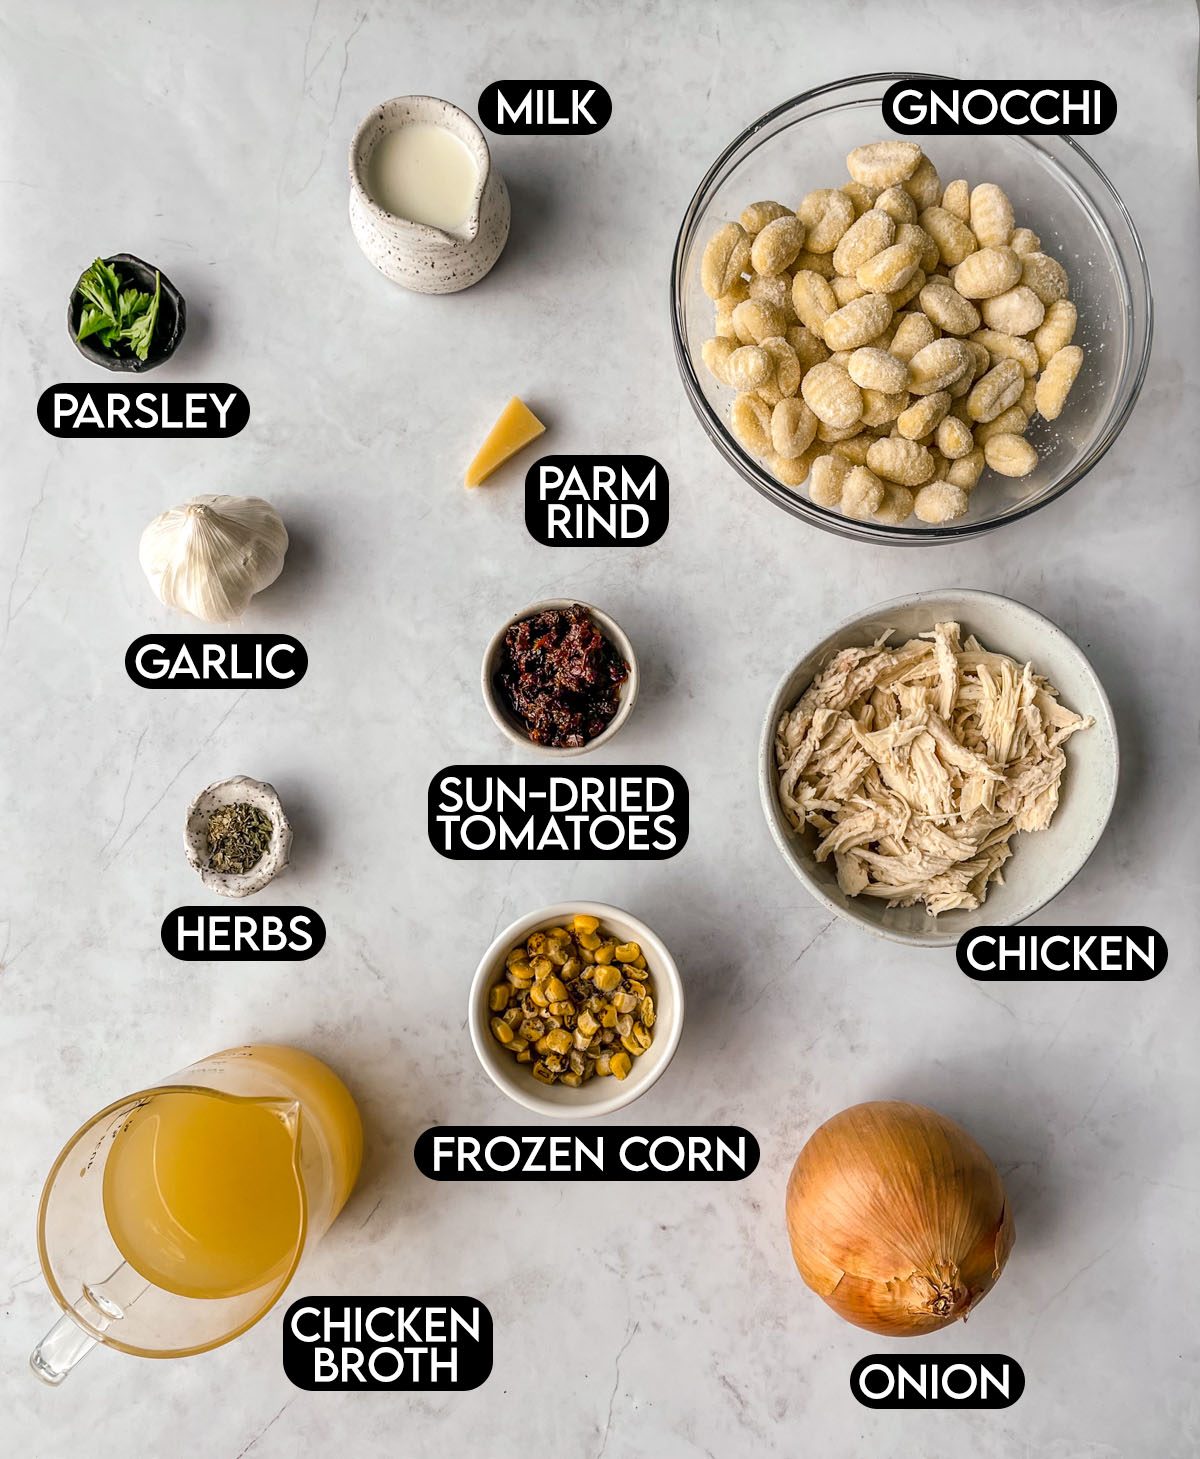 Labeled ingredients for One Pan Creamy Chicken and Gnocchi.